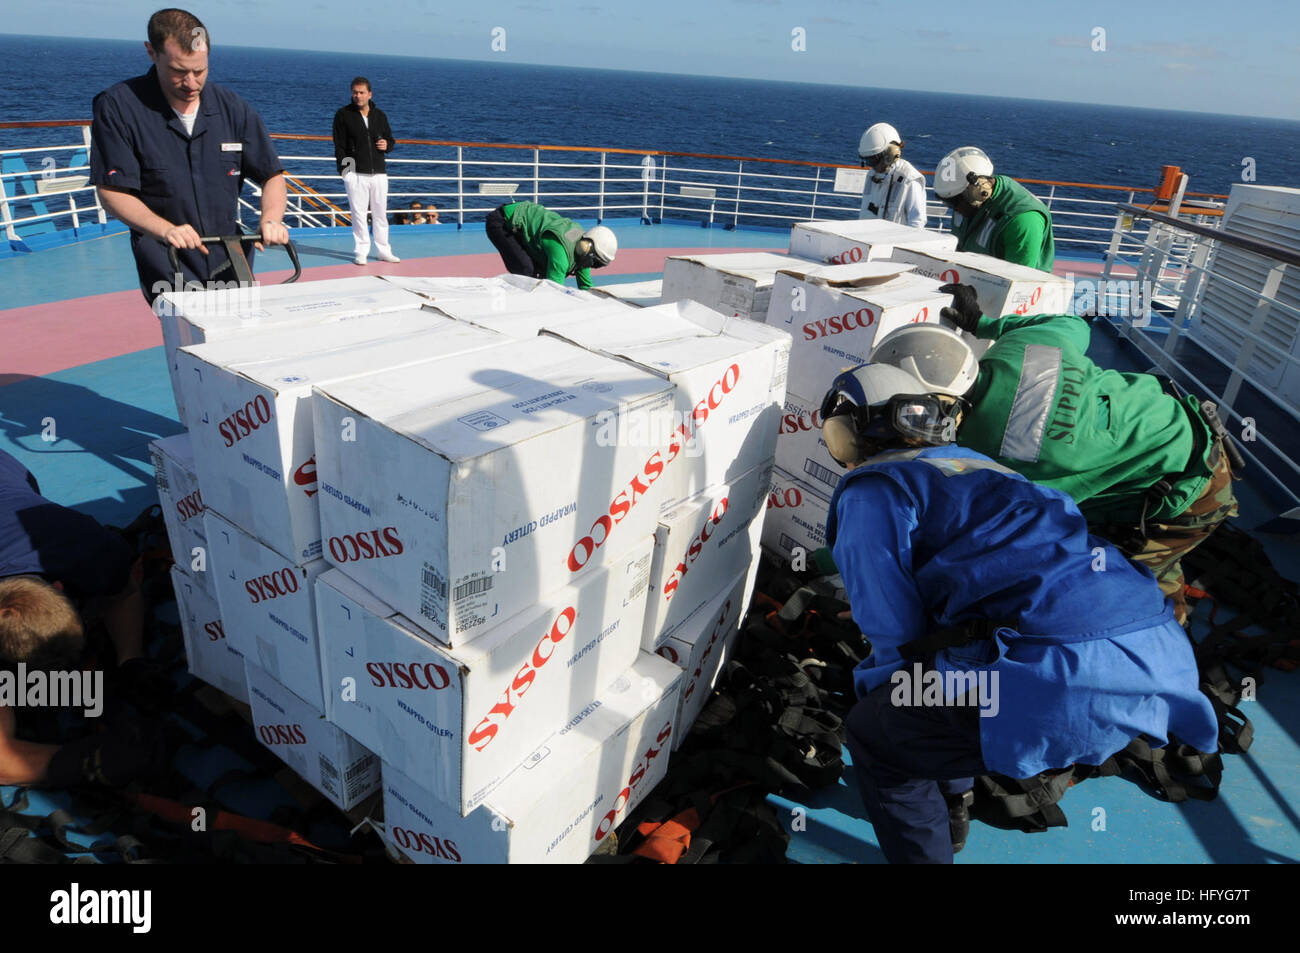 Sailors assigned to the aircraft carrier USS Ronald Reagan (CVN 76) and crew members of Carnival cruise ship C/V Splendor unload pallets of food on the weather-deck of the cruise ship during an emergency vertical replenishment. Ronald Reagan was diverted from its current training maneuvers at the direction of Commander U.S. Third Fleet, and at the request of the U.S. Coast Guard, to a position south near the Carnival cruise ship C/V Splendor to facilitate the delivery of 4,500 pounds of supplies to the cruise ship. Early Monday, CV Splendor reported it was dead in the water 150 nautical miles  Stock Photo